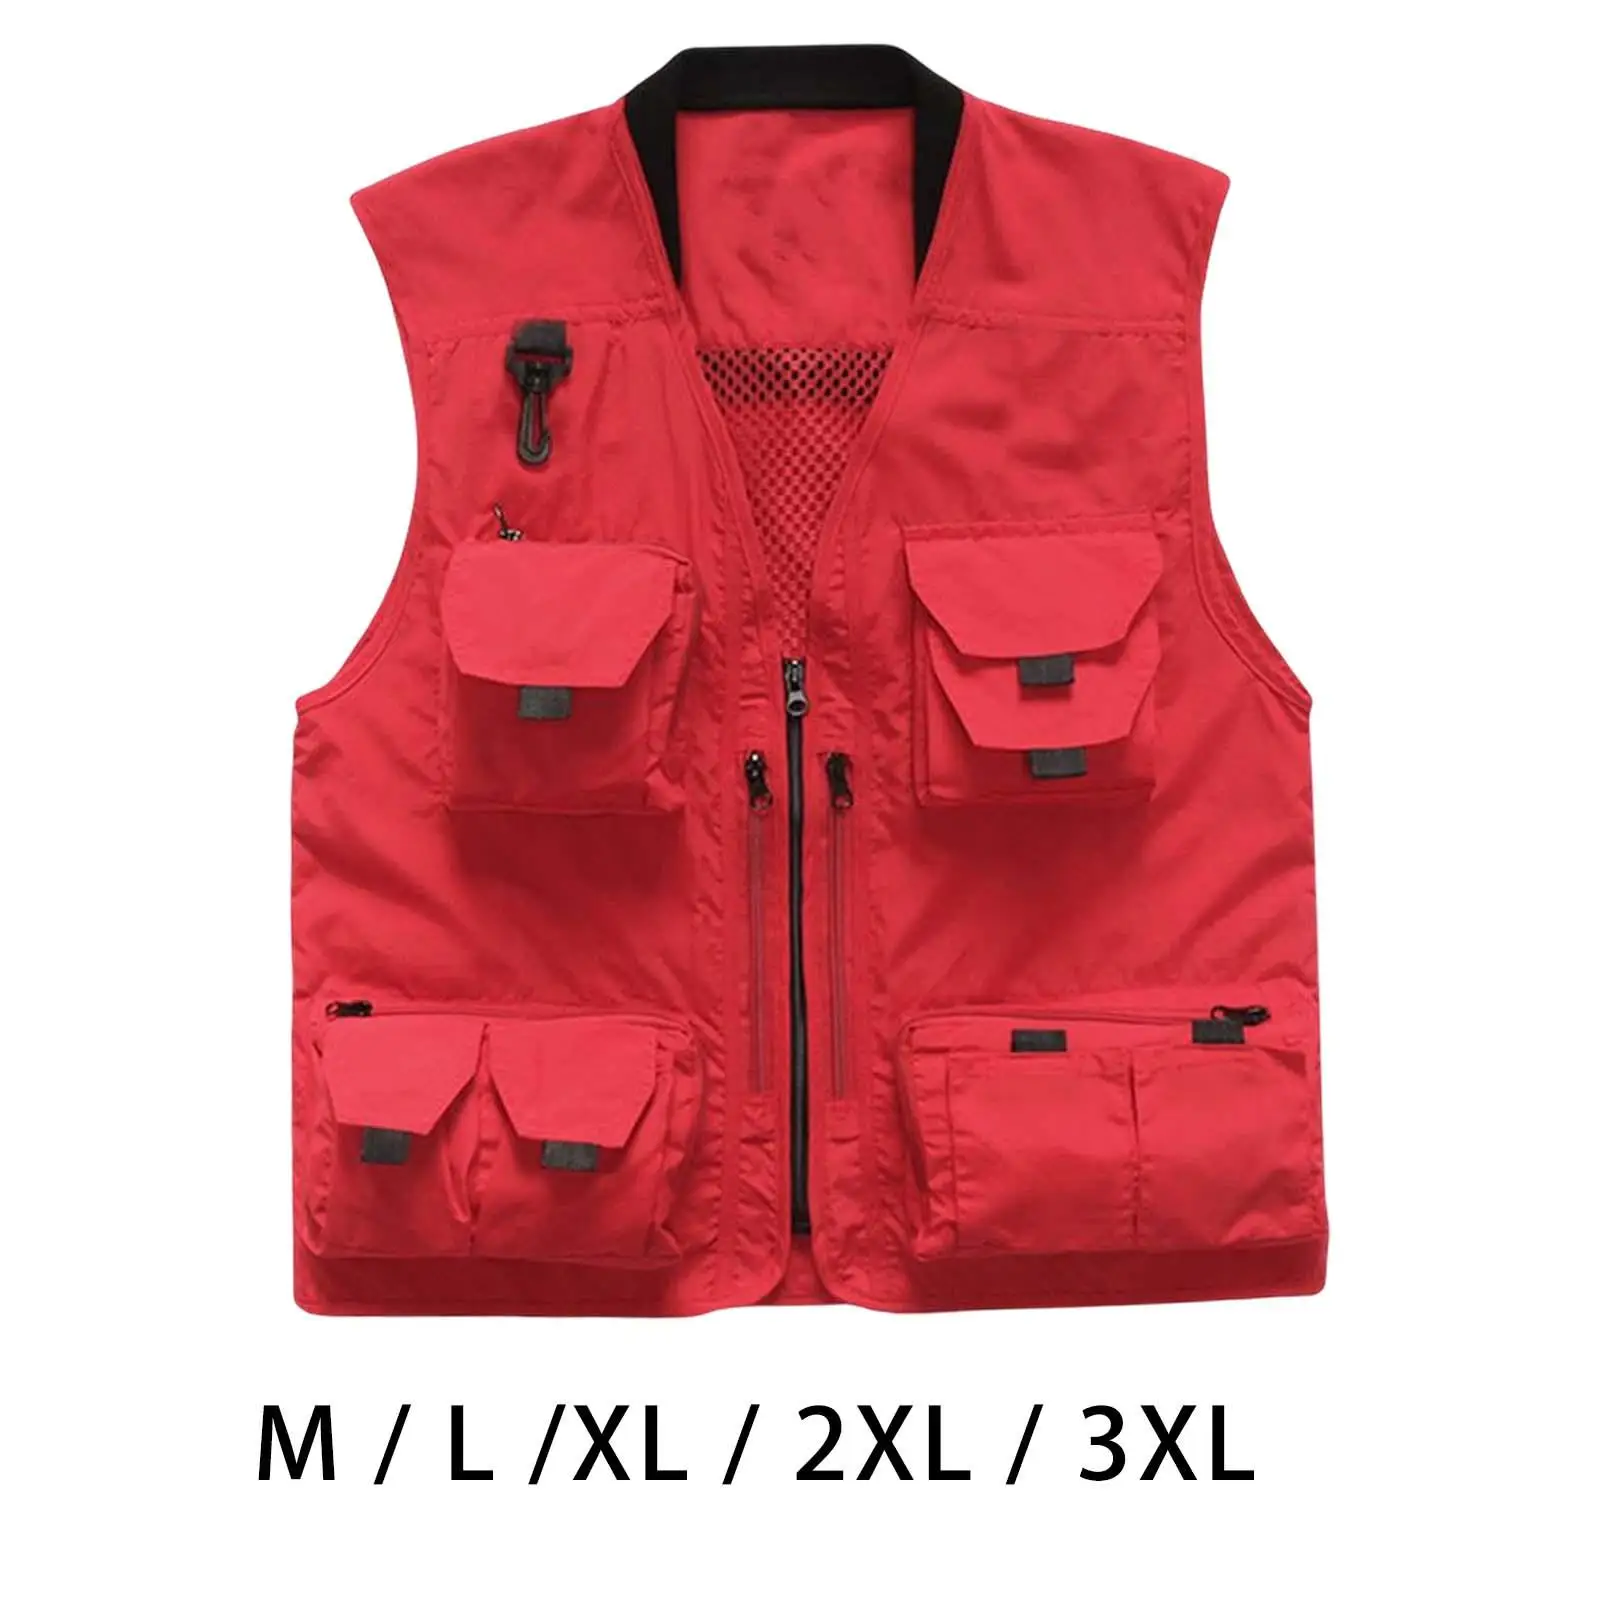 Fishing Vest Clothing Outdoor Activities with Pockets Mesh Camping Fishermen